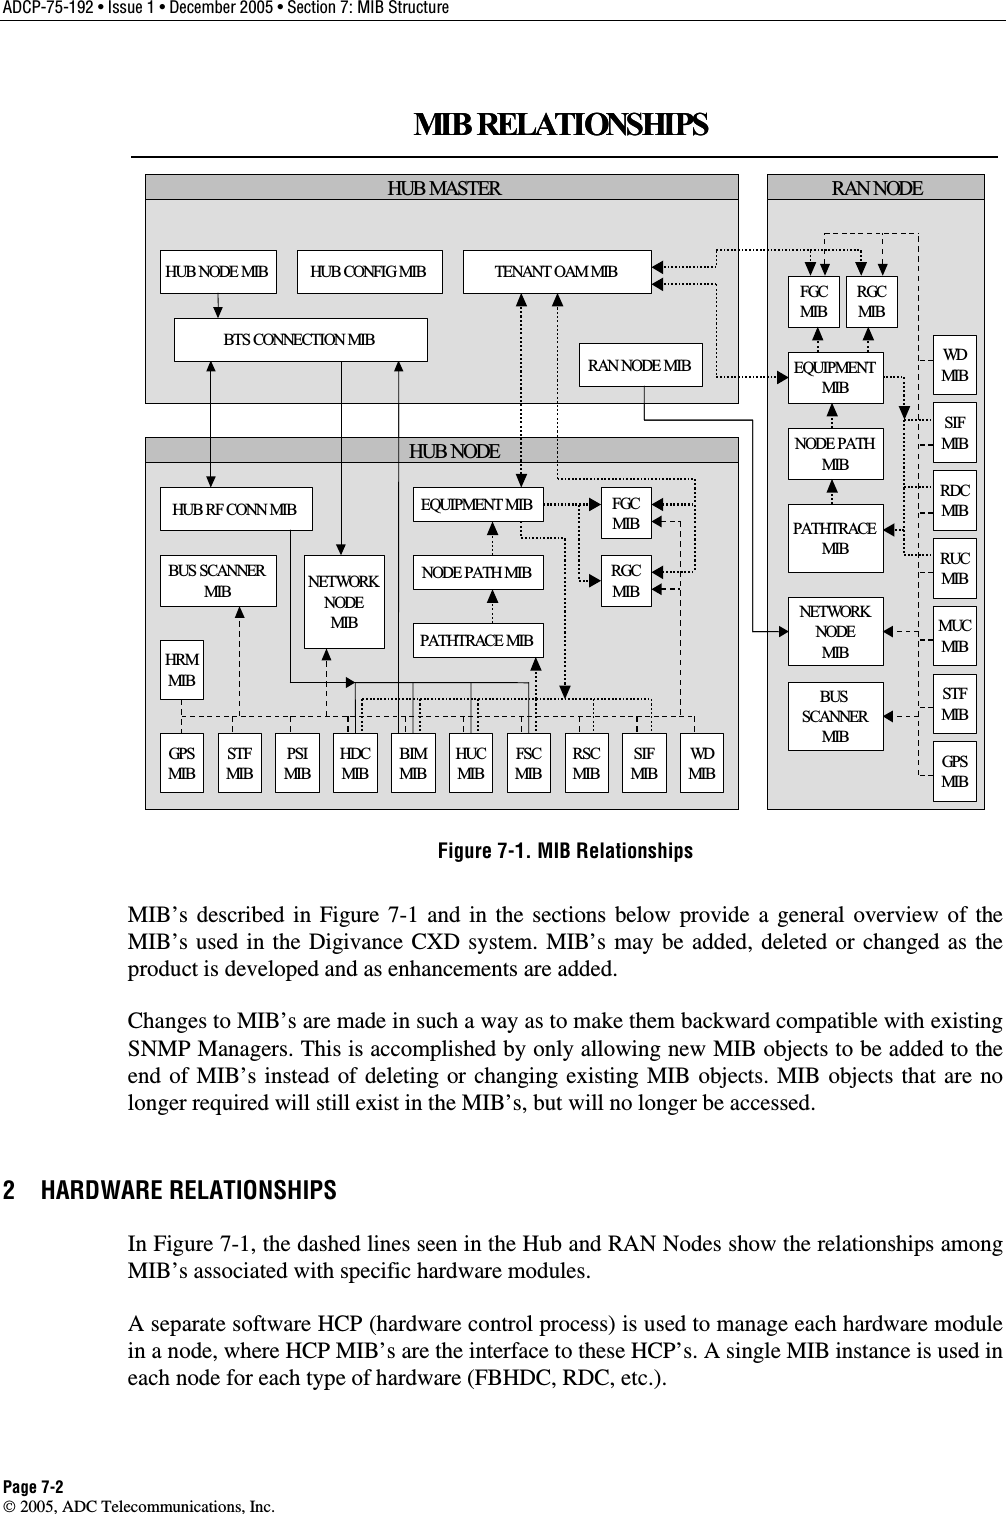 ADCP-75-192 • Issue 1 • December 2005 • Section 7: MIB Structure Page 7-2  2005, ADC Telecommunications, Inc. HUB MASTERHUB NODERAN NODERDCMIBRUCMIBMUCMIBSIFMIBSIFMIBRSCMIBFSCMIBHUCMIBBIMMIBHDCMIBPSIMIBSTFMIBSTFMIBBUS SCANNERMIBPATHTRACE MIBEQUIPMENT MIBHUB RF CONN MIBNODE PATH MIBBUSSCANNERMIBPATHTRACEMIBNODE PATHMIBEQUIPMENTMIBNETWORKNODEMIBNETWORKNODEMIBBTS CONNECTION MIBTENANT OAM MIBWDMIBWDMIBHUB NODE MIBGPSMIBGPSMIBHRMMIBFGCMIBRGCMIBFGCMIBRGCMIBMIB RELATIONSHIPSRAN NODE MIBHUB CONFIG MIBHUB MASTERHUB NODERAN NODERDCMIBRUCMIBMUCMIBSIFMIBSIFMIBRSCMIBFSCMIBHUCMIBBIMMIBHDCMIBPSIMIBSTFMIBSTFMIBBUS SCANNERMIBPATHTRACE MIBEQUIPMENT MIBHUB RF CONN MIBNODE PATH MIBBUSSCANNERMIBPATHTRACEMIBNODE PATHMIBEQUIPMENTMIBNETWORKNODEMIBNETWORKNODEMIBBTS CONNECTION MIBTENANT OAM MIBWDMIBWDMIBHUB NODE MIBGPSMIBGPSMIBHRMMIBFGCMIBRGCMIBFGCMIBRGCMIBMIB RELATIONSHIPSRAN NODE MIBHUB CONFIG MIB Figure 7-1. MIB Relationships MIB’s described in Figure 7-1 and in the sections below provide a general overview of the MIB’s used in the Digivance CXD system. MIB’s may be added, deleted or changed as the product is developed and as enhancements are added.  Changes to MIB’s are made in such a way as to make them backward compatible with existing SNMP Managers. This is accomplished by only allowing new MIB objects to be added to the end of MIB’s instead of deleting or changing existing MIB objects. MIB objects that are no longer required will still exist in the MIB’s, but will no longer be accessed. 2 HARDWARE RELATIONSHIPS In Figure 7-1, the dashed lines seen in the Hub and RAN Nodes show the relationships among MIB’s associated with specific hardware modules.  A separate software HCP (hardware control process) is used to manage each hardware module in a node, where HCP MIB’s are the interface to these HCP’s. A single MIB instance is used in each node for each type of hardware (FBHDC, RDC, etc.).  